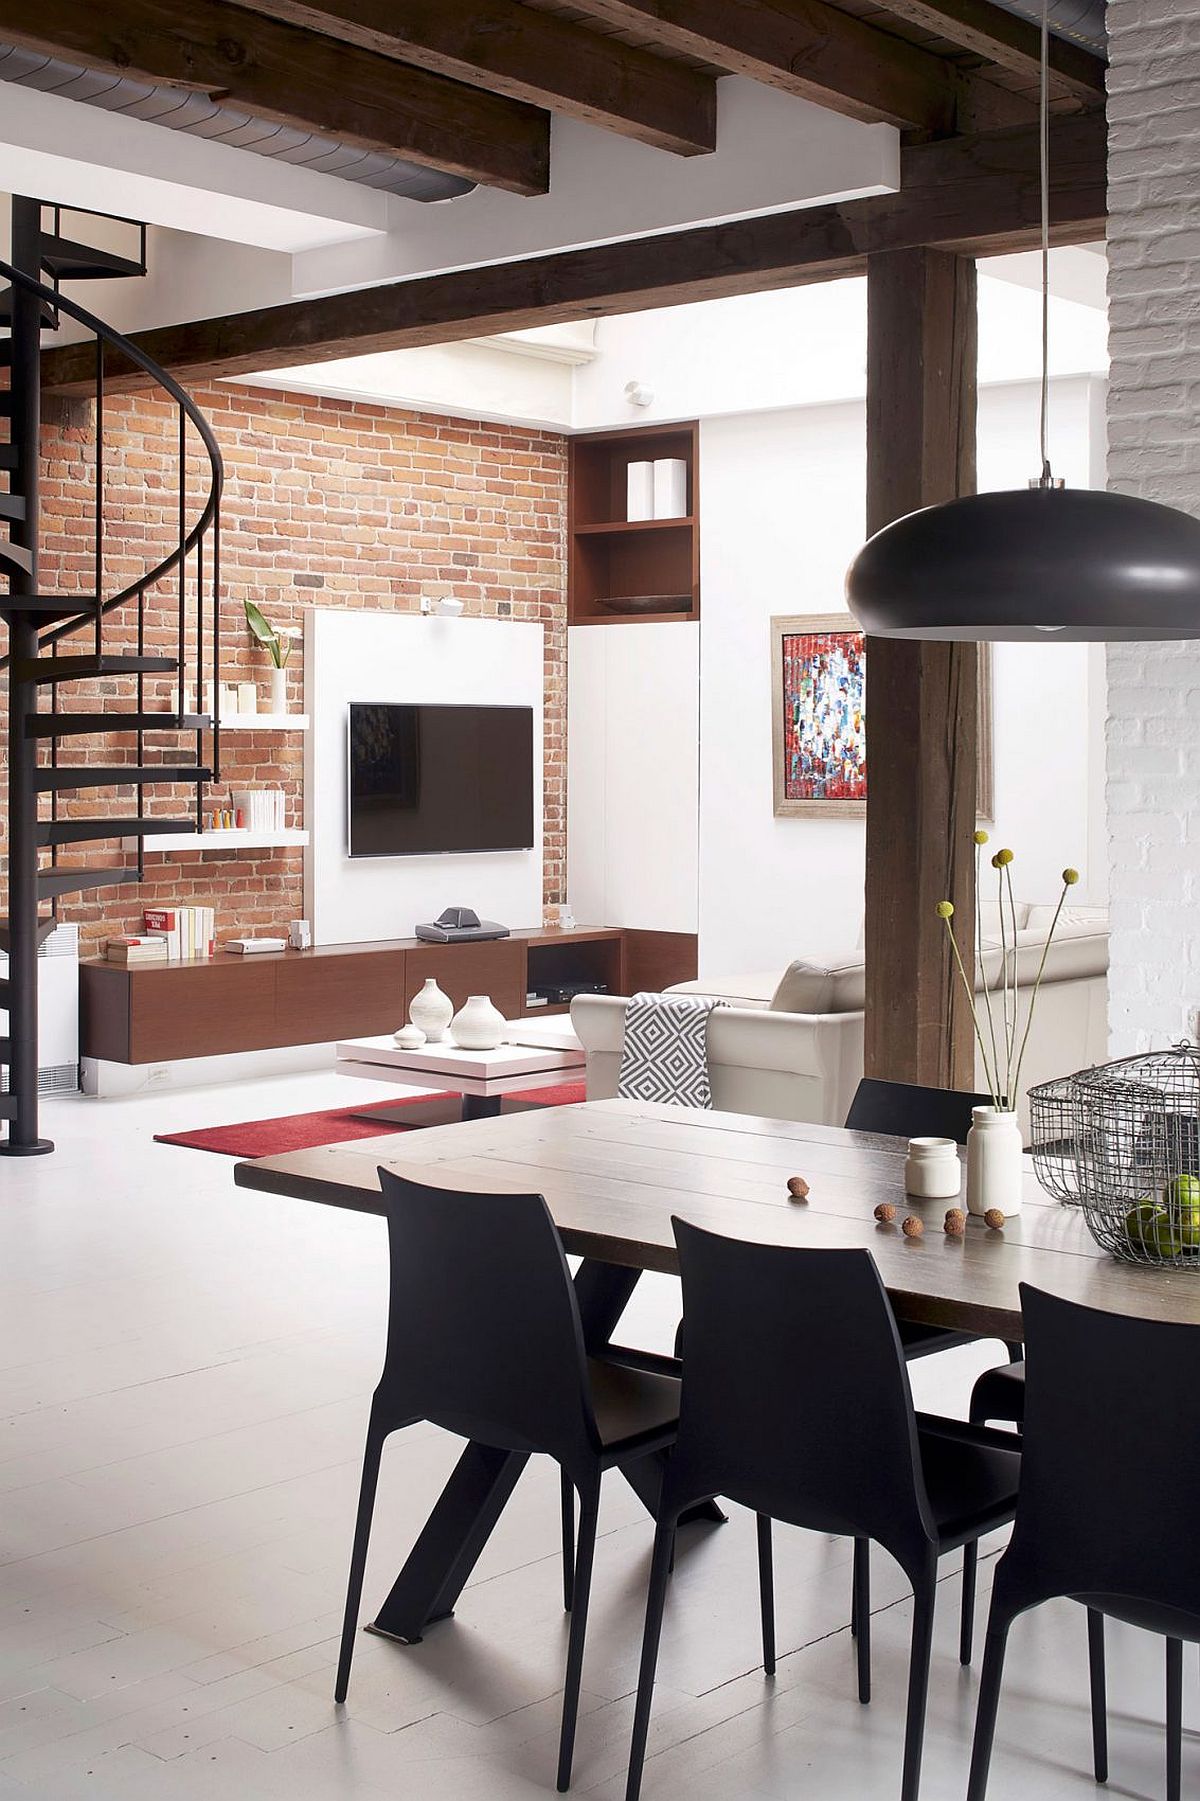 Small living area of the revamped industrial loft in Old Montreal